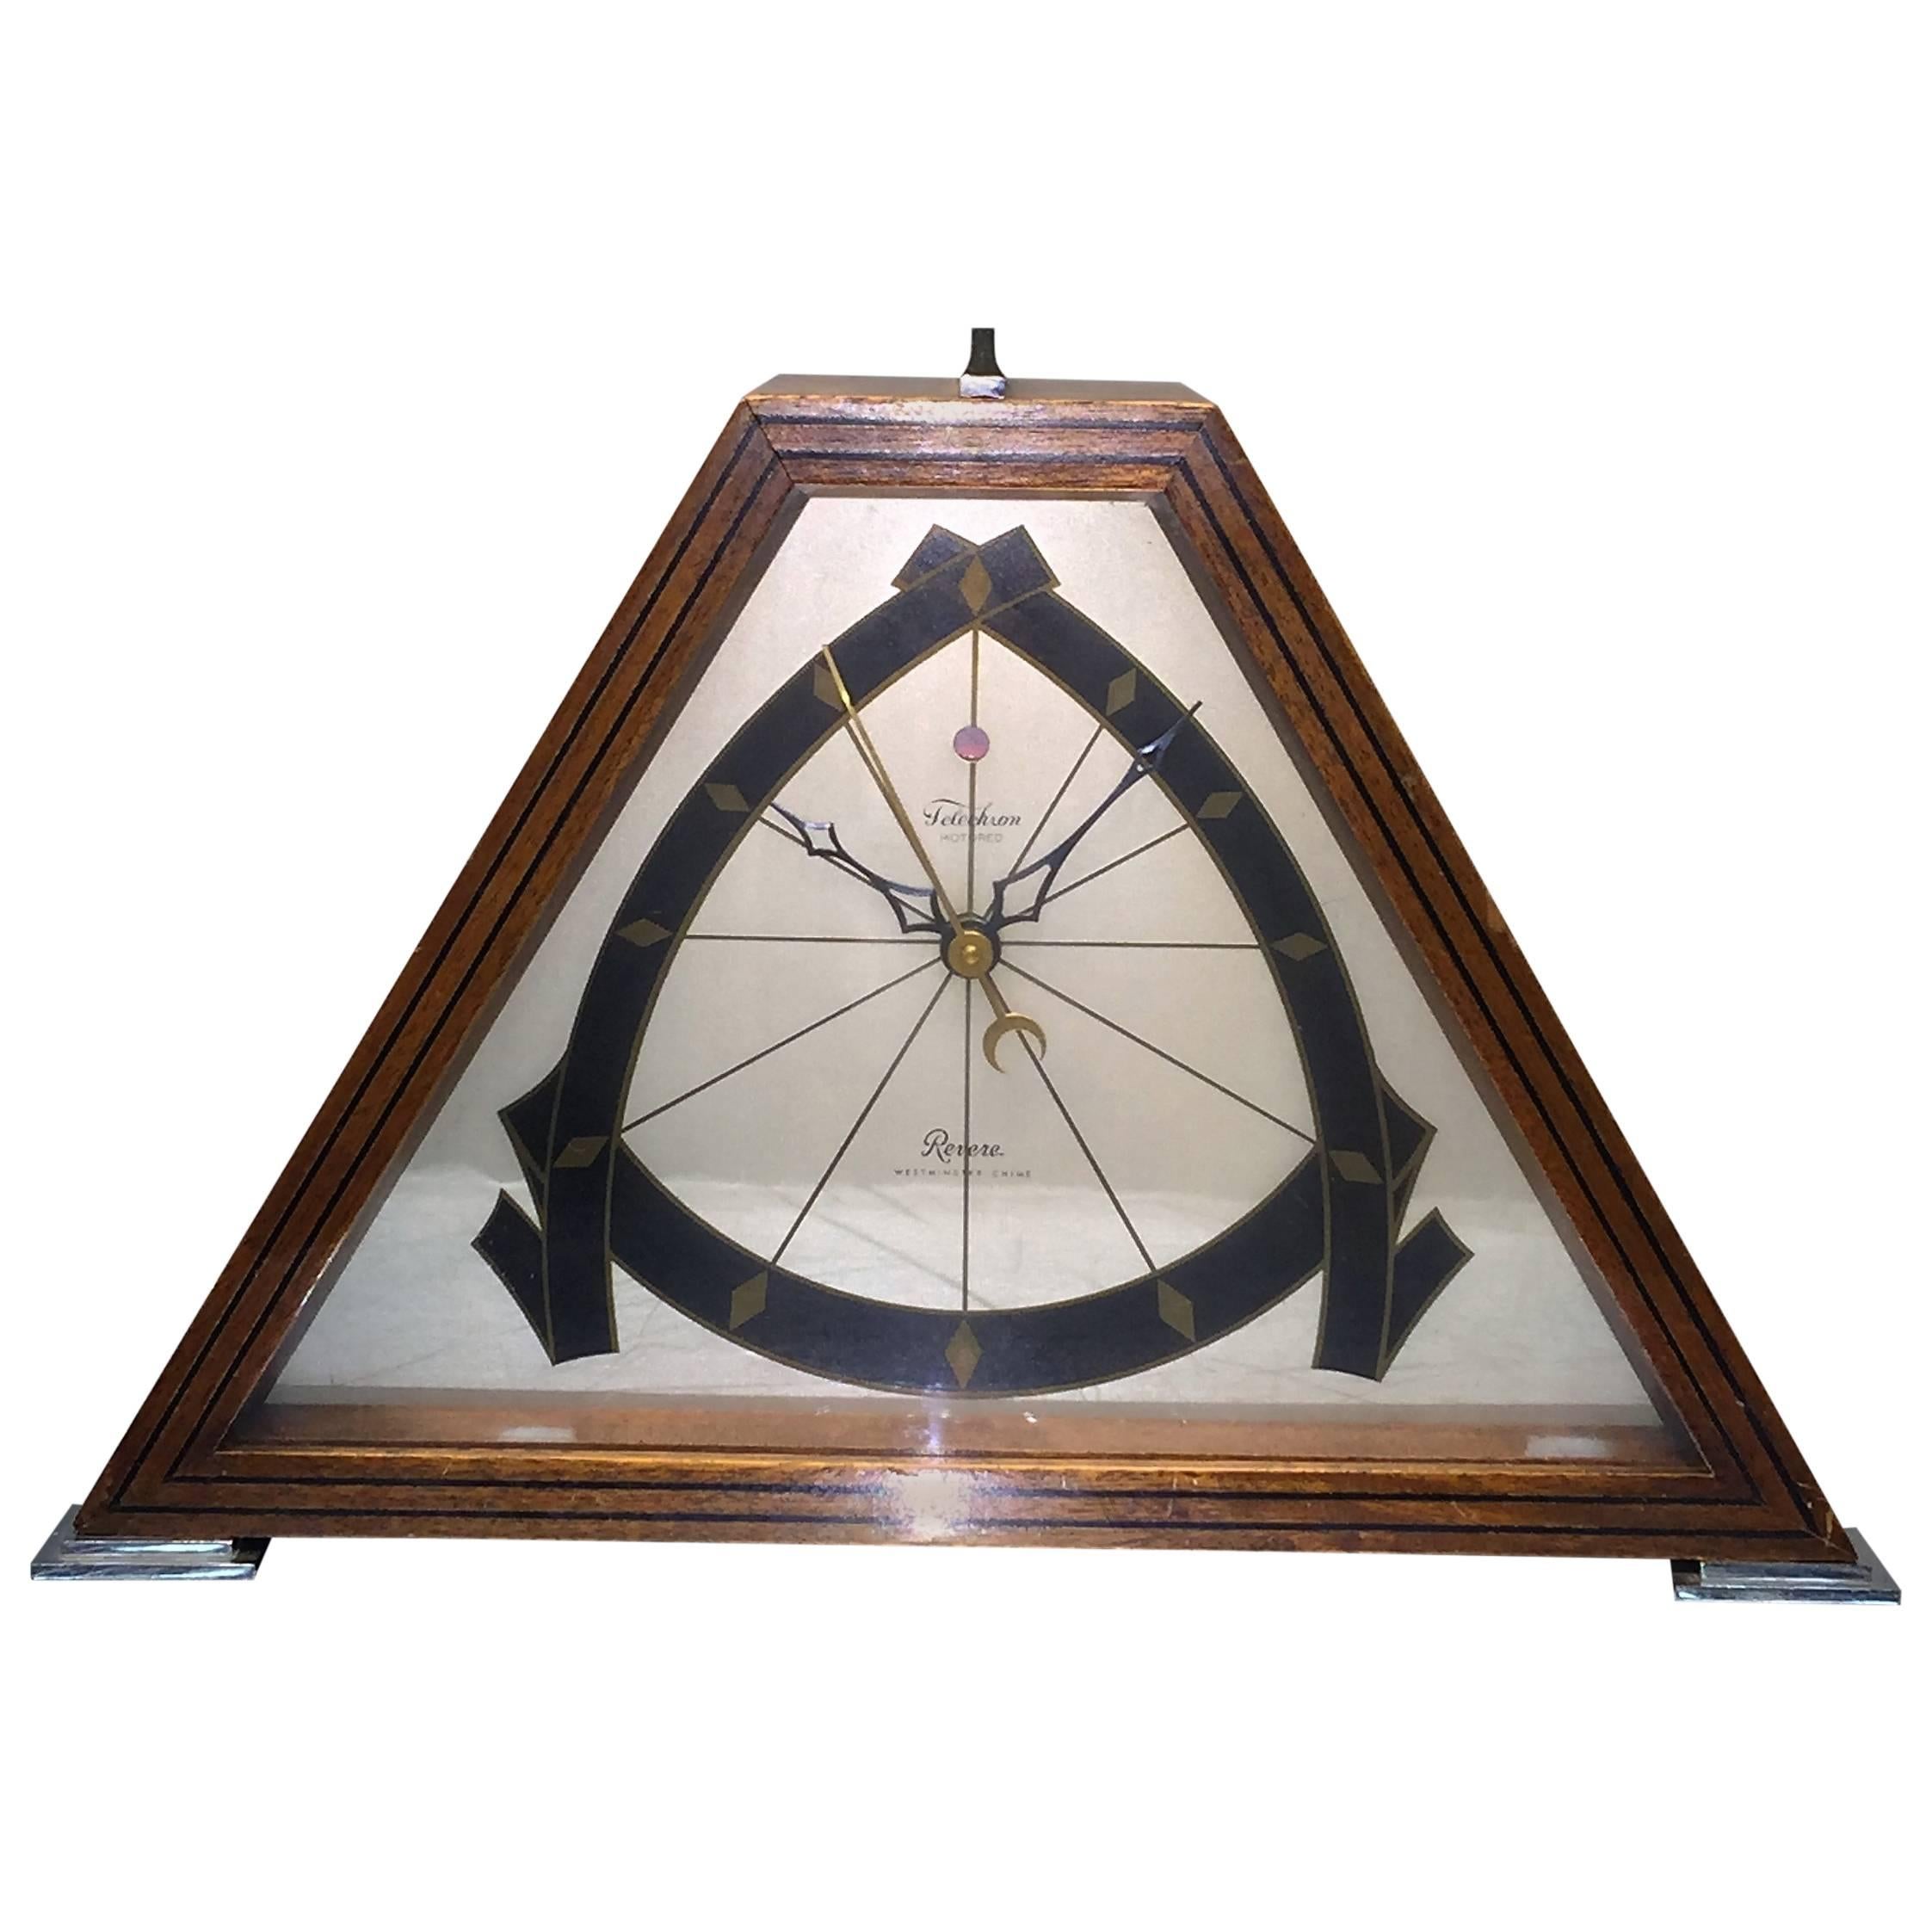 Magnificent Art Deco Westminster Chime Electric Clock For Sale